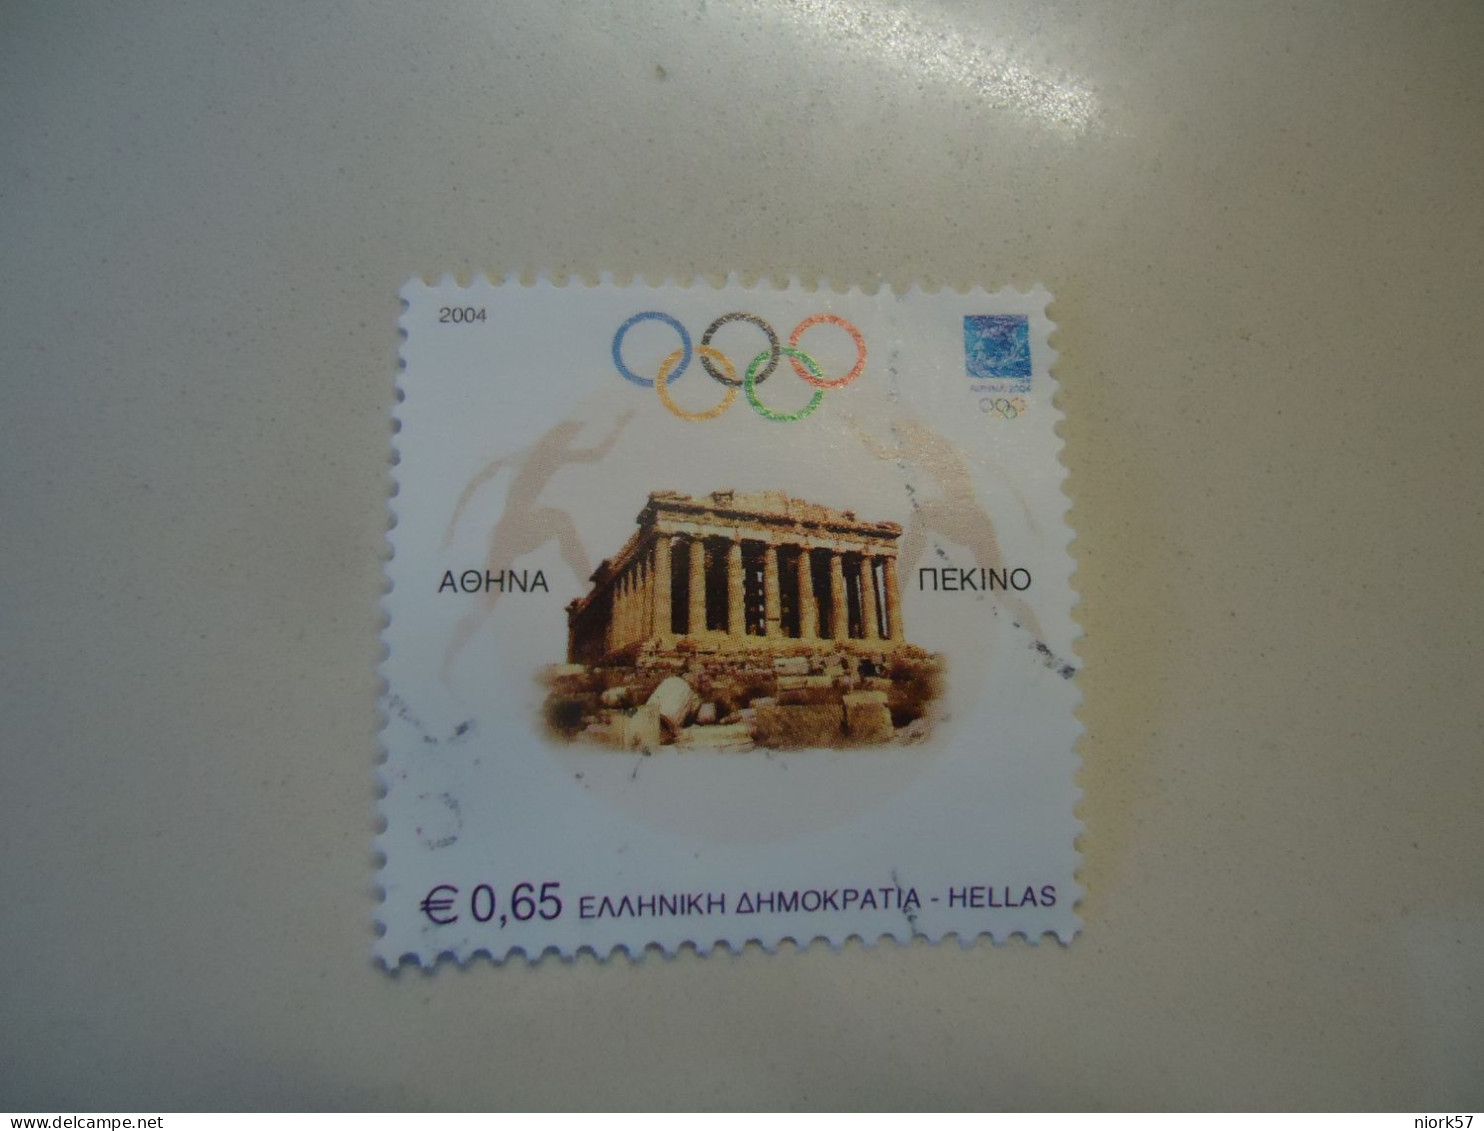 GREECE   USED  STAMPS 2004 OLYMPIC GAMES ATHENS 2004 - Verano 2004: Atenas - Paralympic